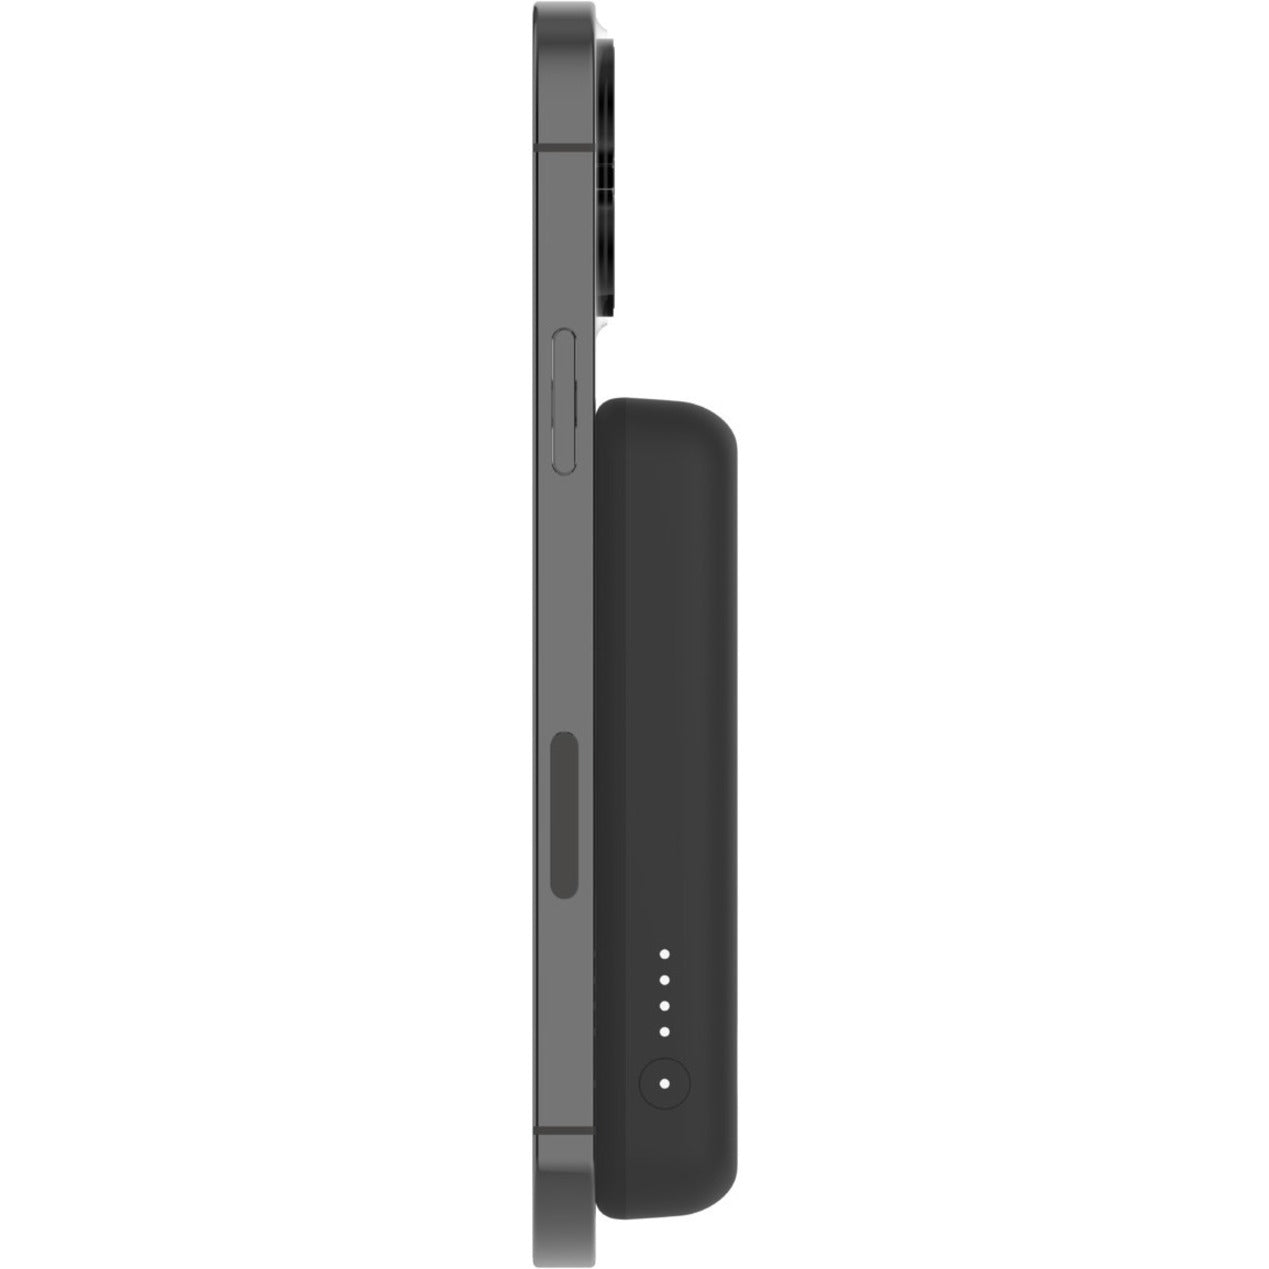 Belkin BPD004BTBK Magnetic Wireless Power Bank 5K + Stand, Portable Charger for iPhone 13 Pro, iPhone 12, 5000mAh Battery Capacity